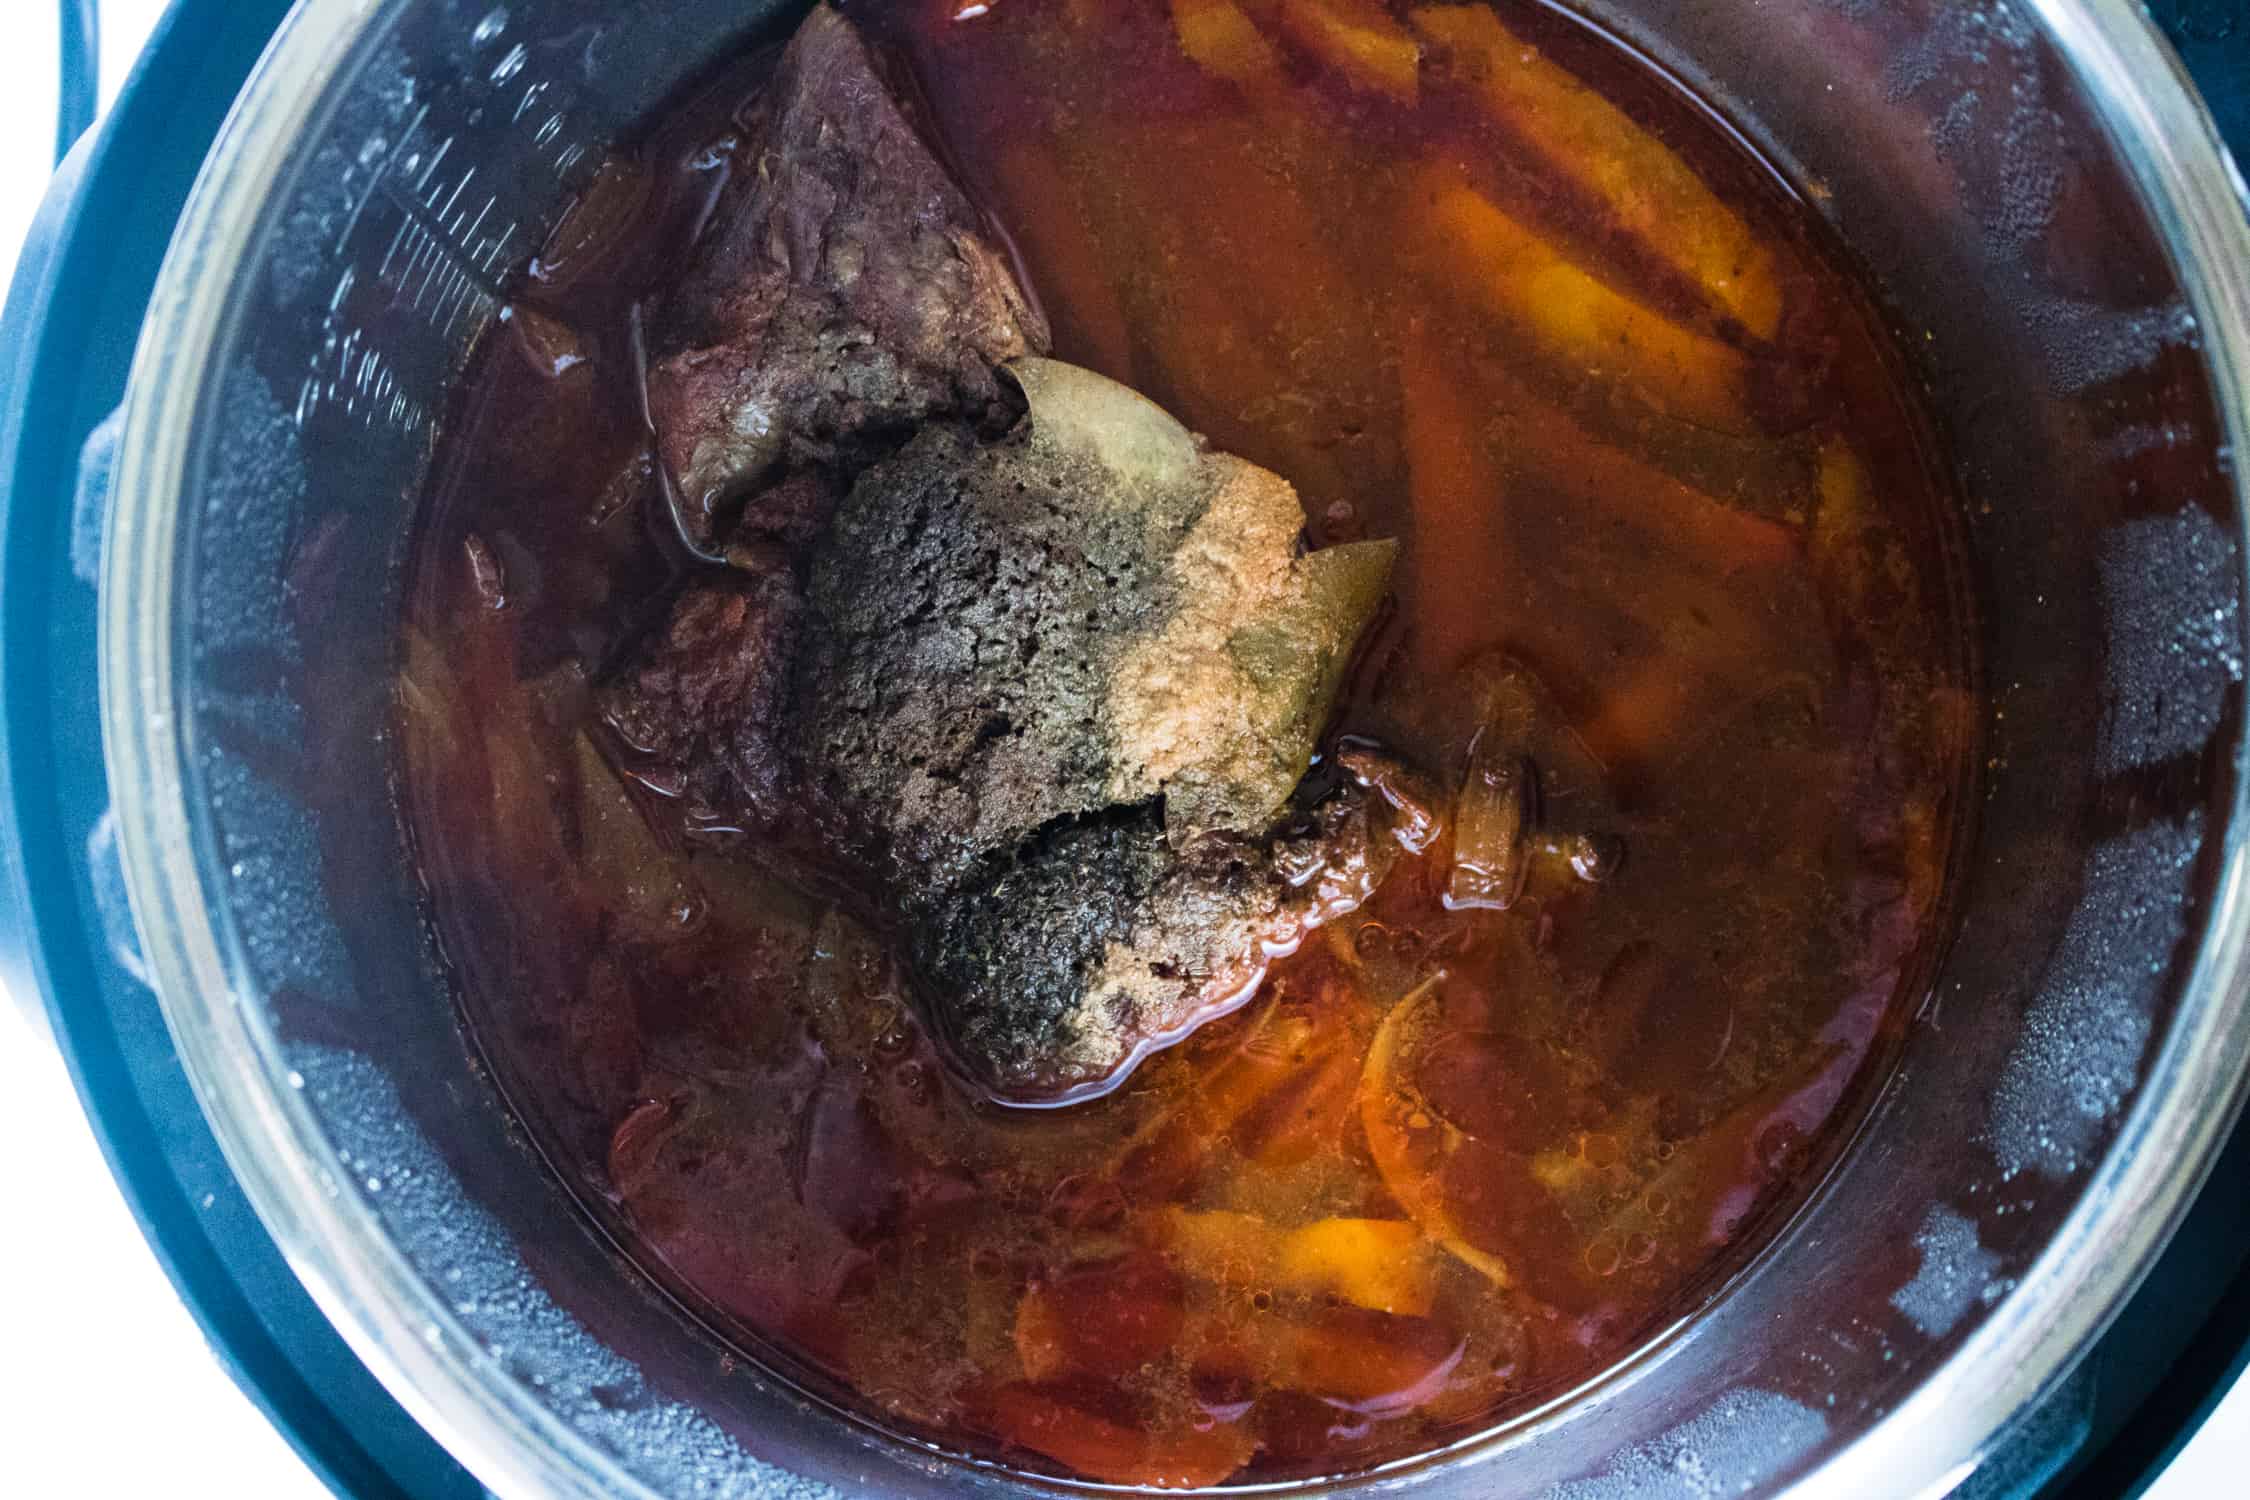 A beef roast and ingredients for Instant Pot Beef Carnitas being cooked inside an Instant Pot